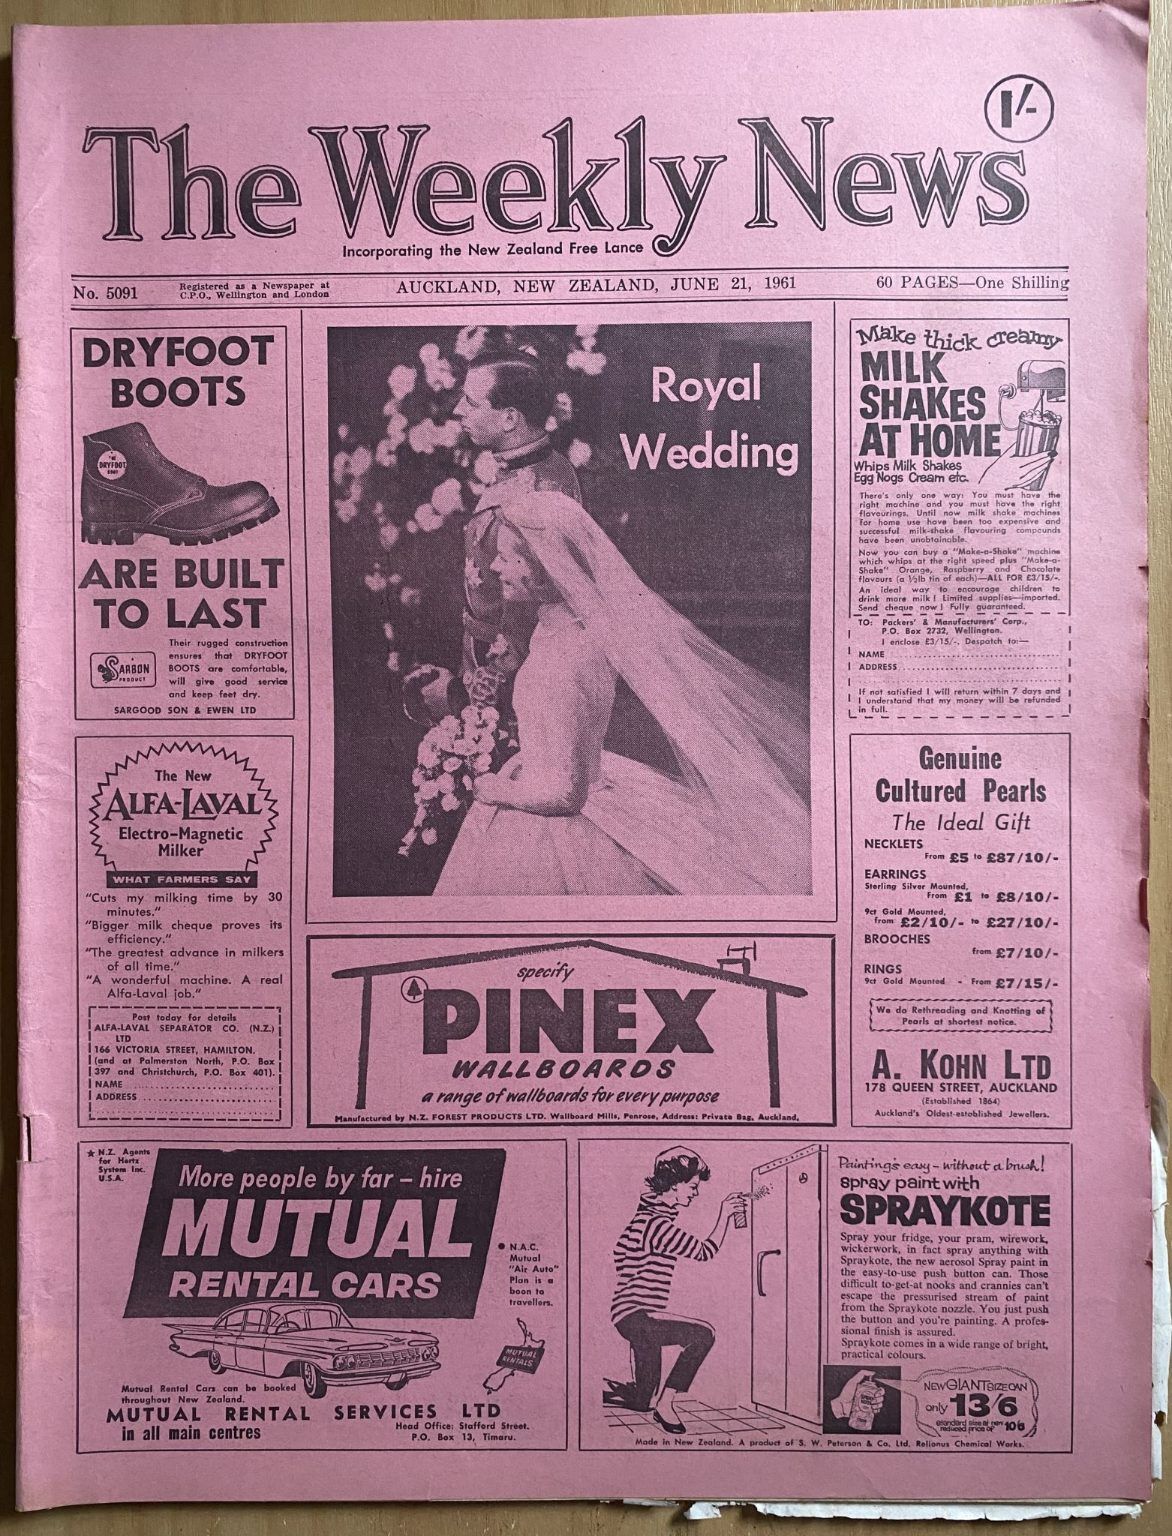 OLD NEWSPAPER: The Weekly News, No. 5091, 21 June 1961